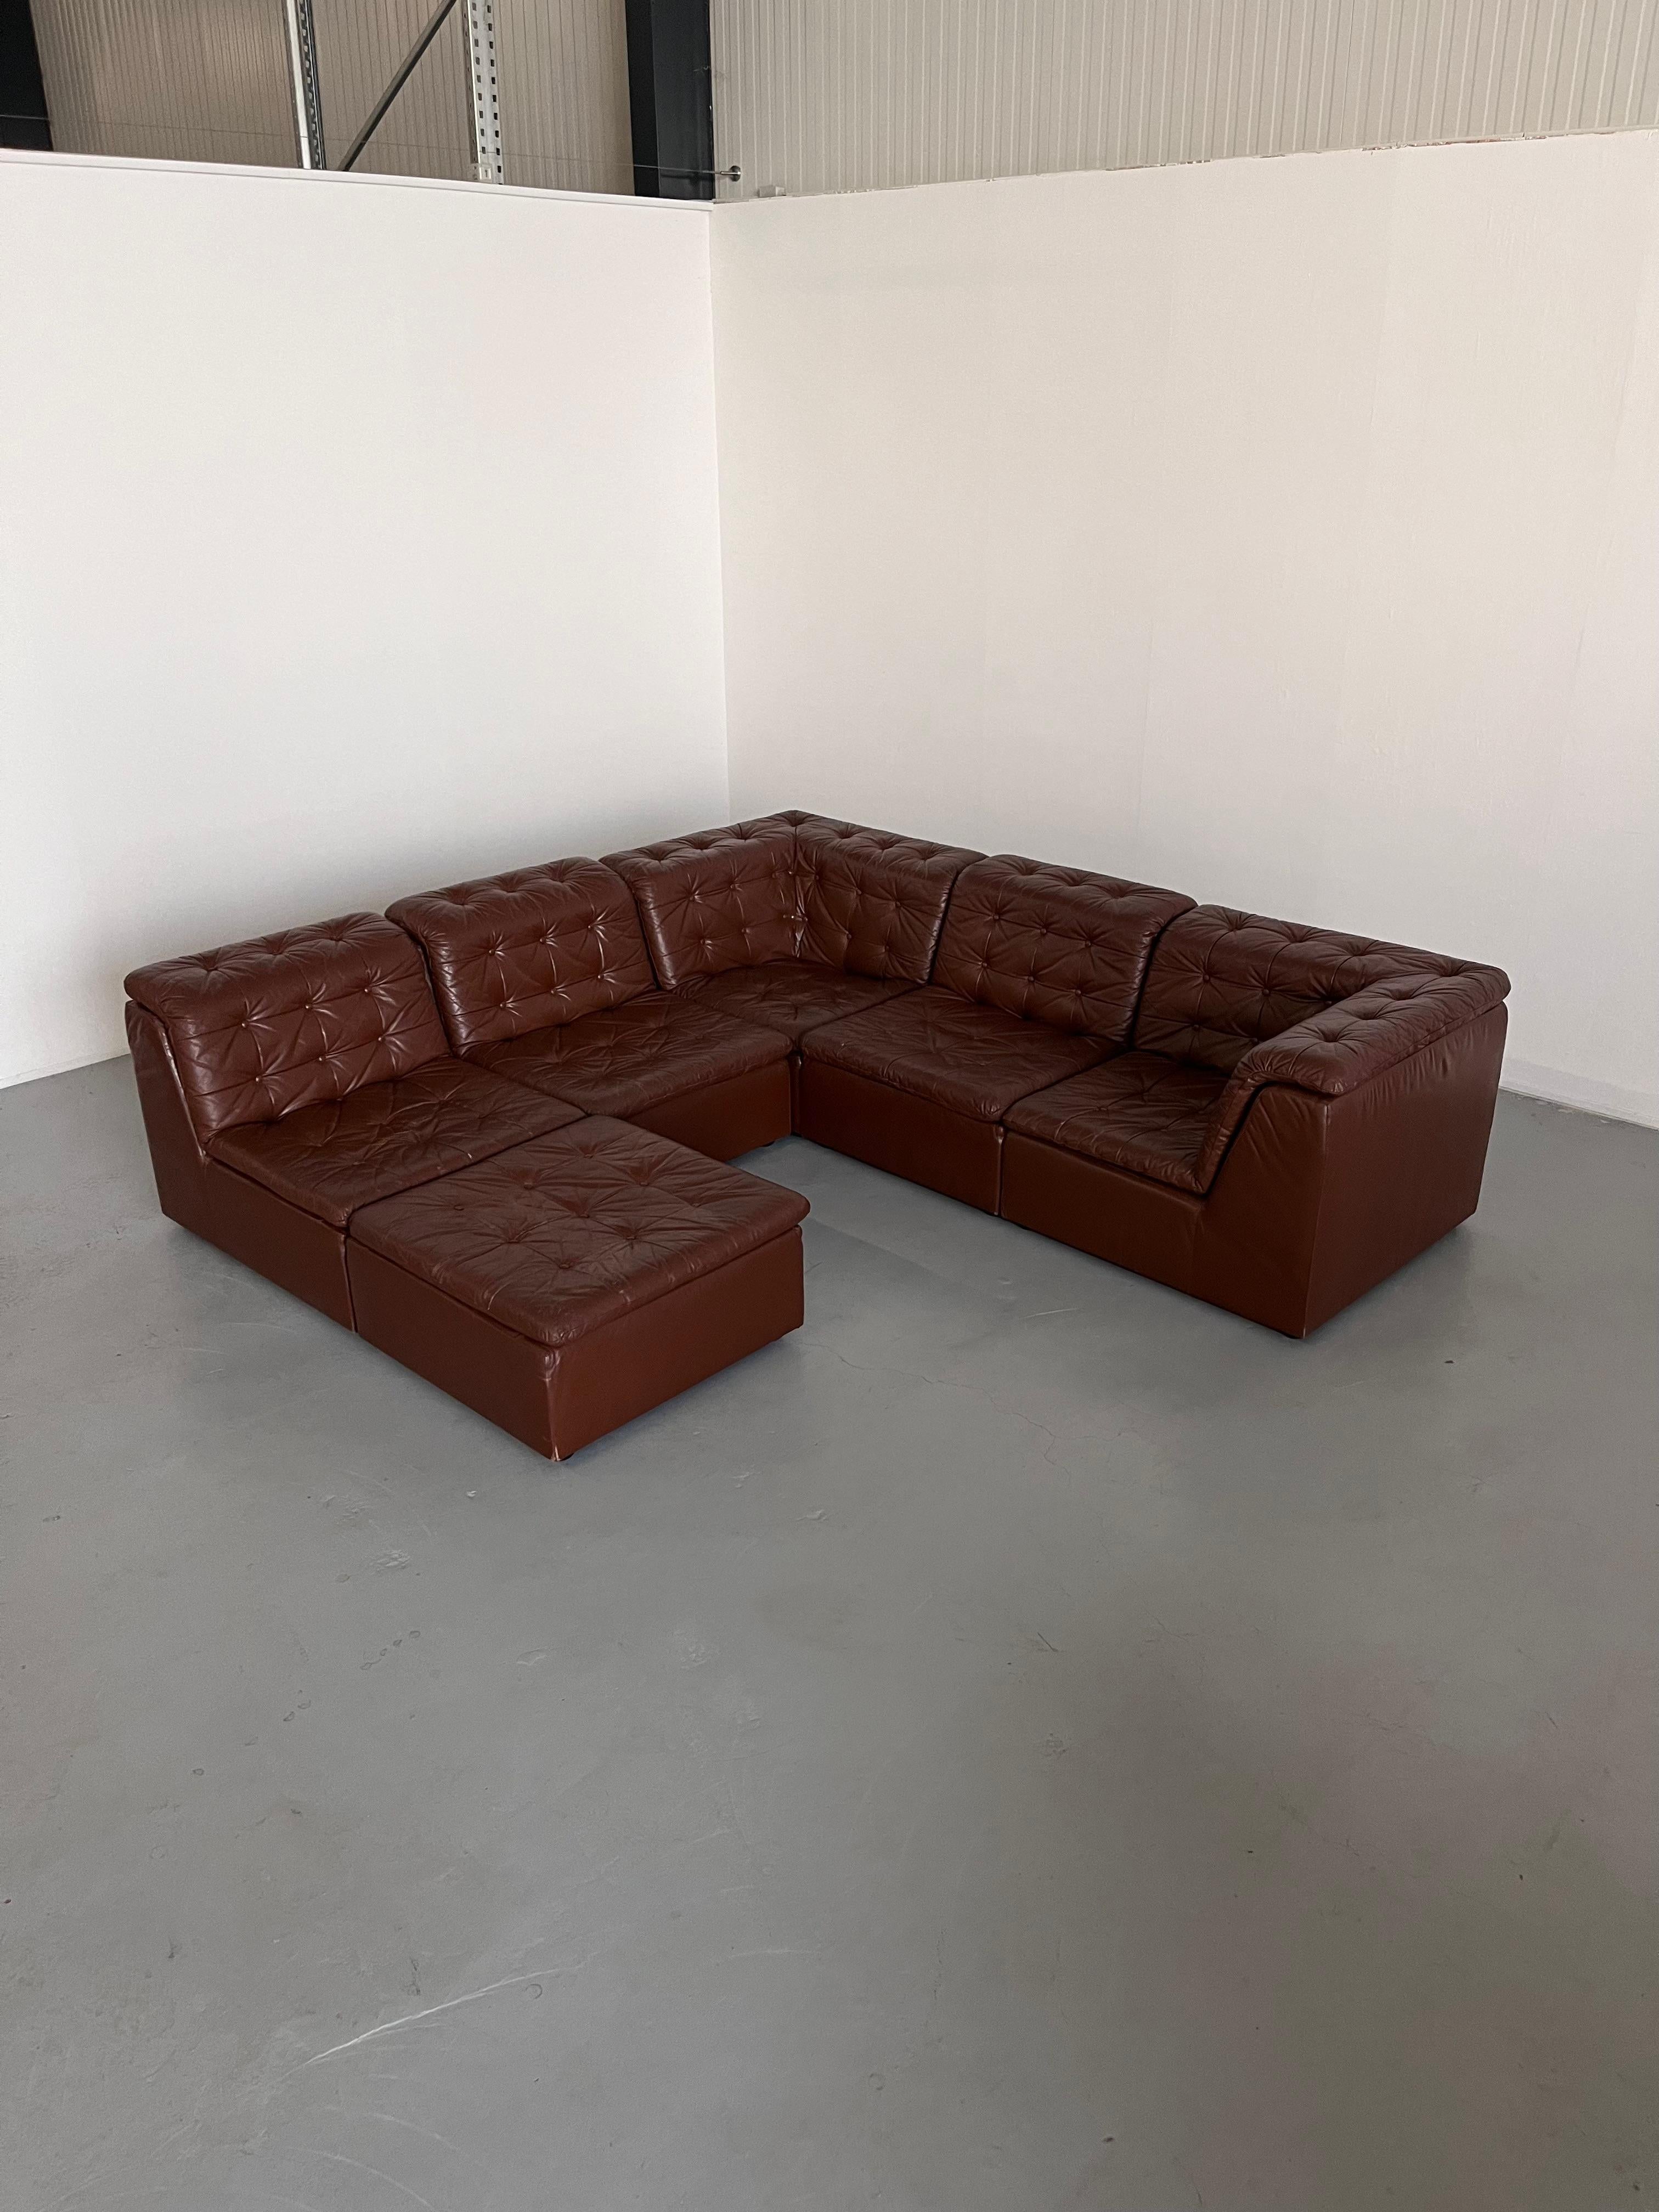 Vintage Patchwork Cognac Leather Six-Part Modular Sofa by Laauser, 1970s Germany In Good Condition For Sale In Zagreb, HR